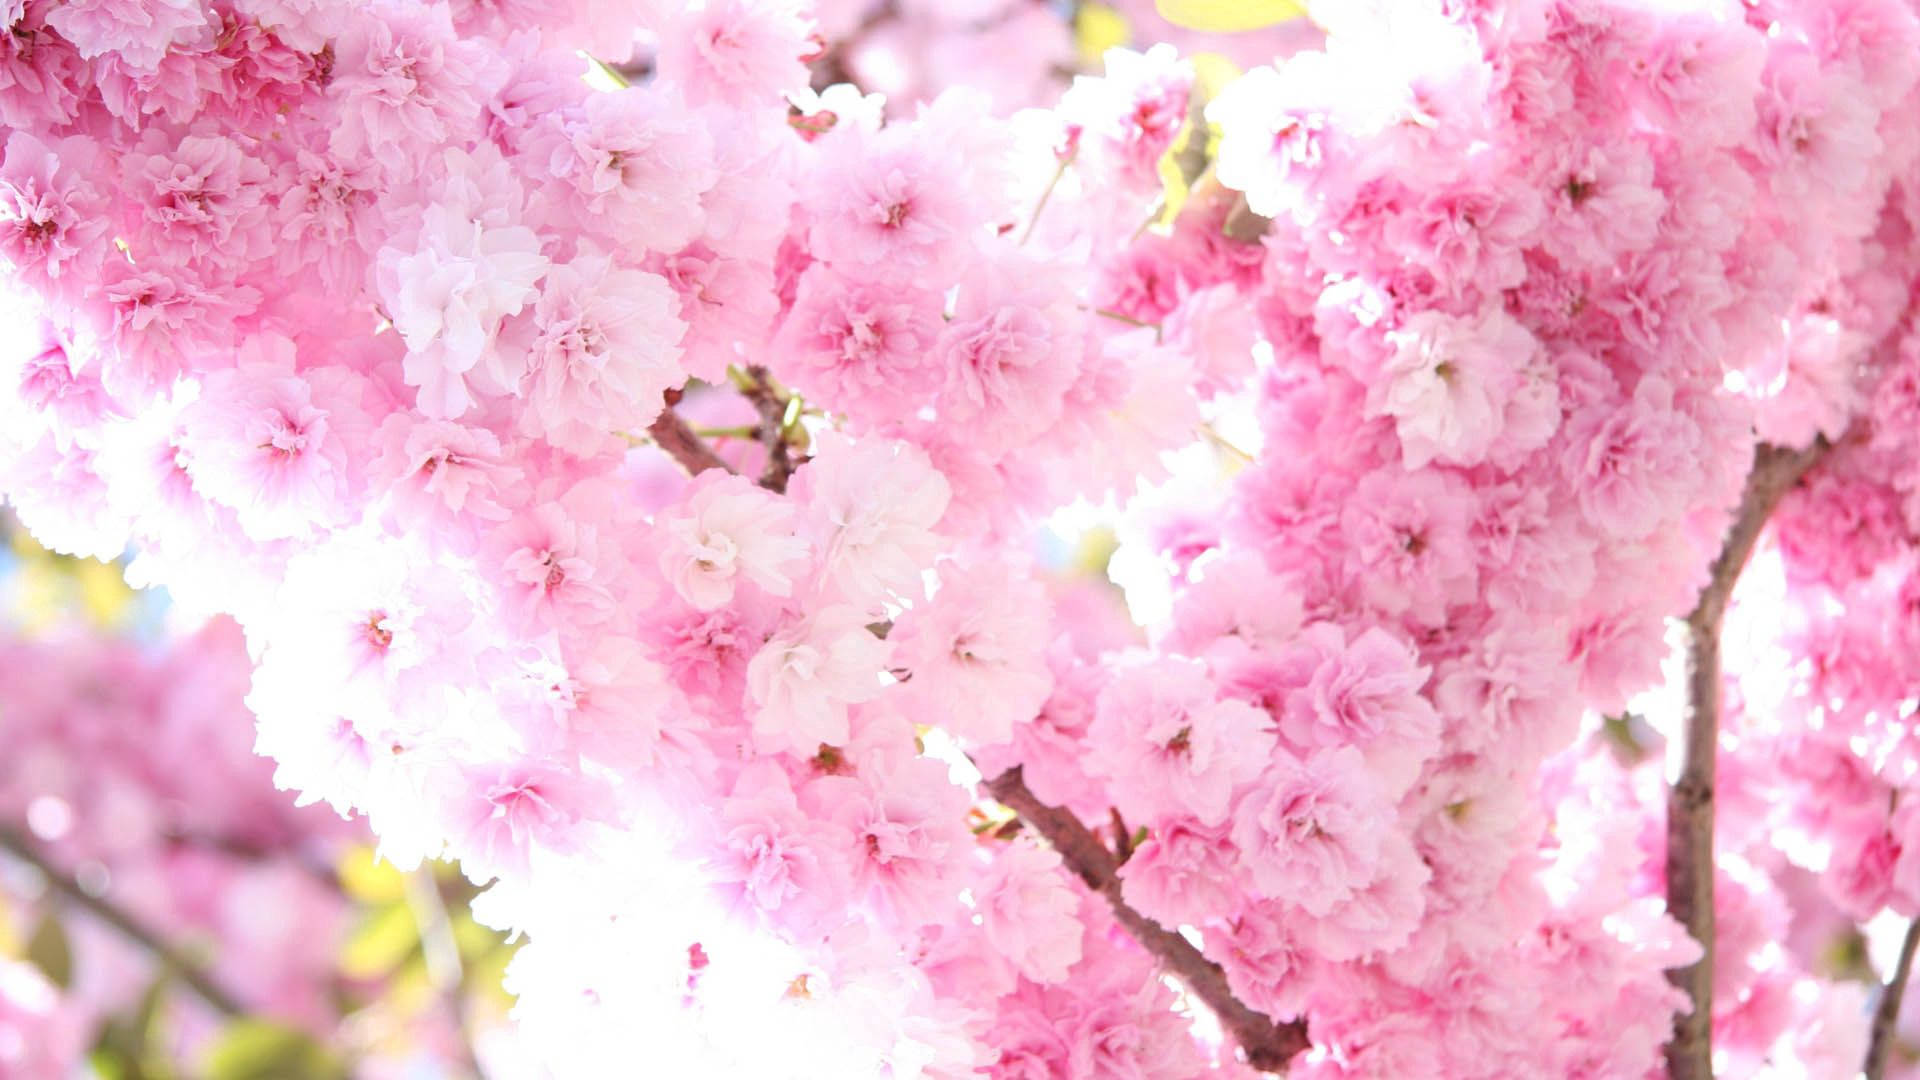 Pretty Pink Spring Blossoms Wallpaper